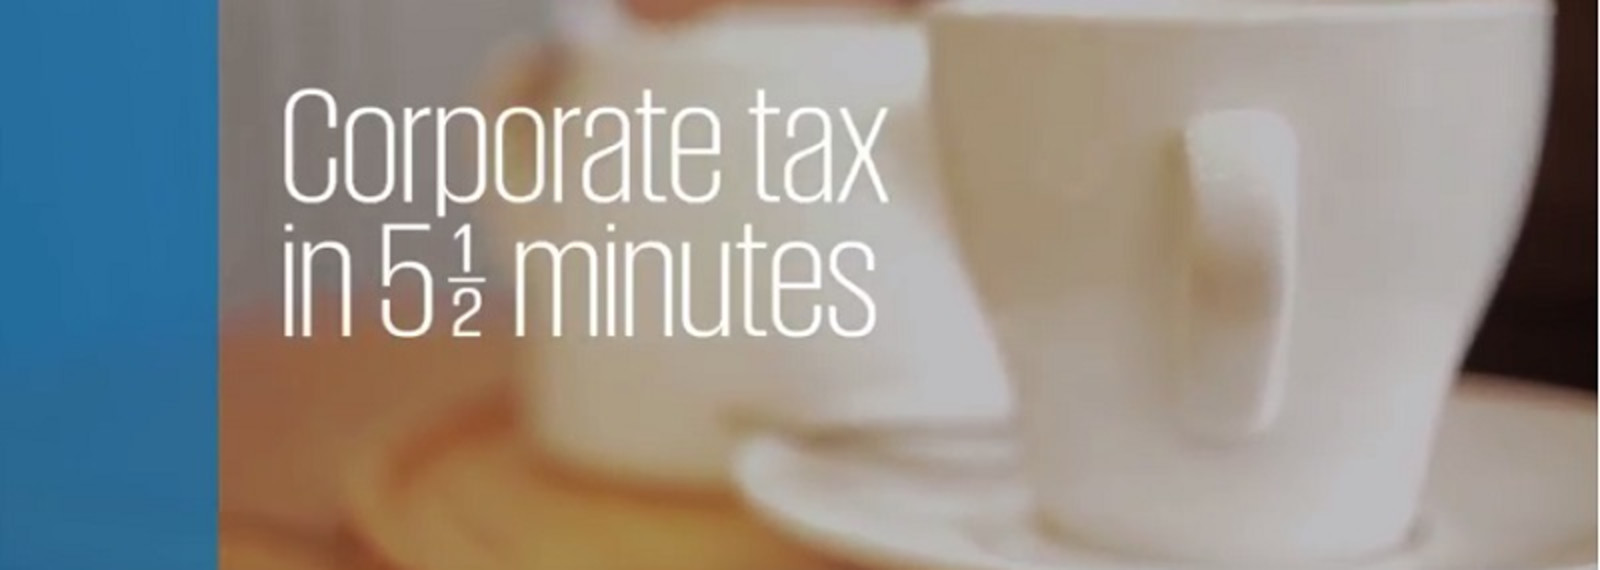 Image of Corporate tax in 5 1/2 minutes